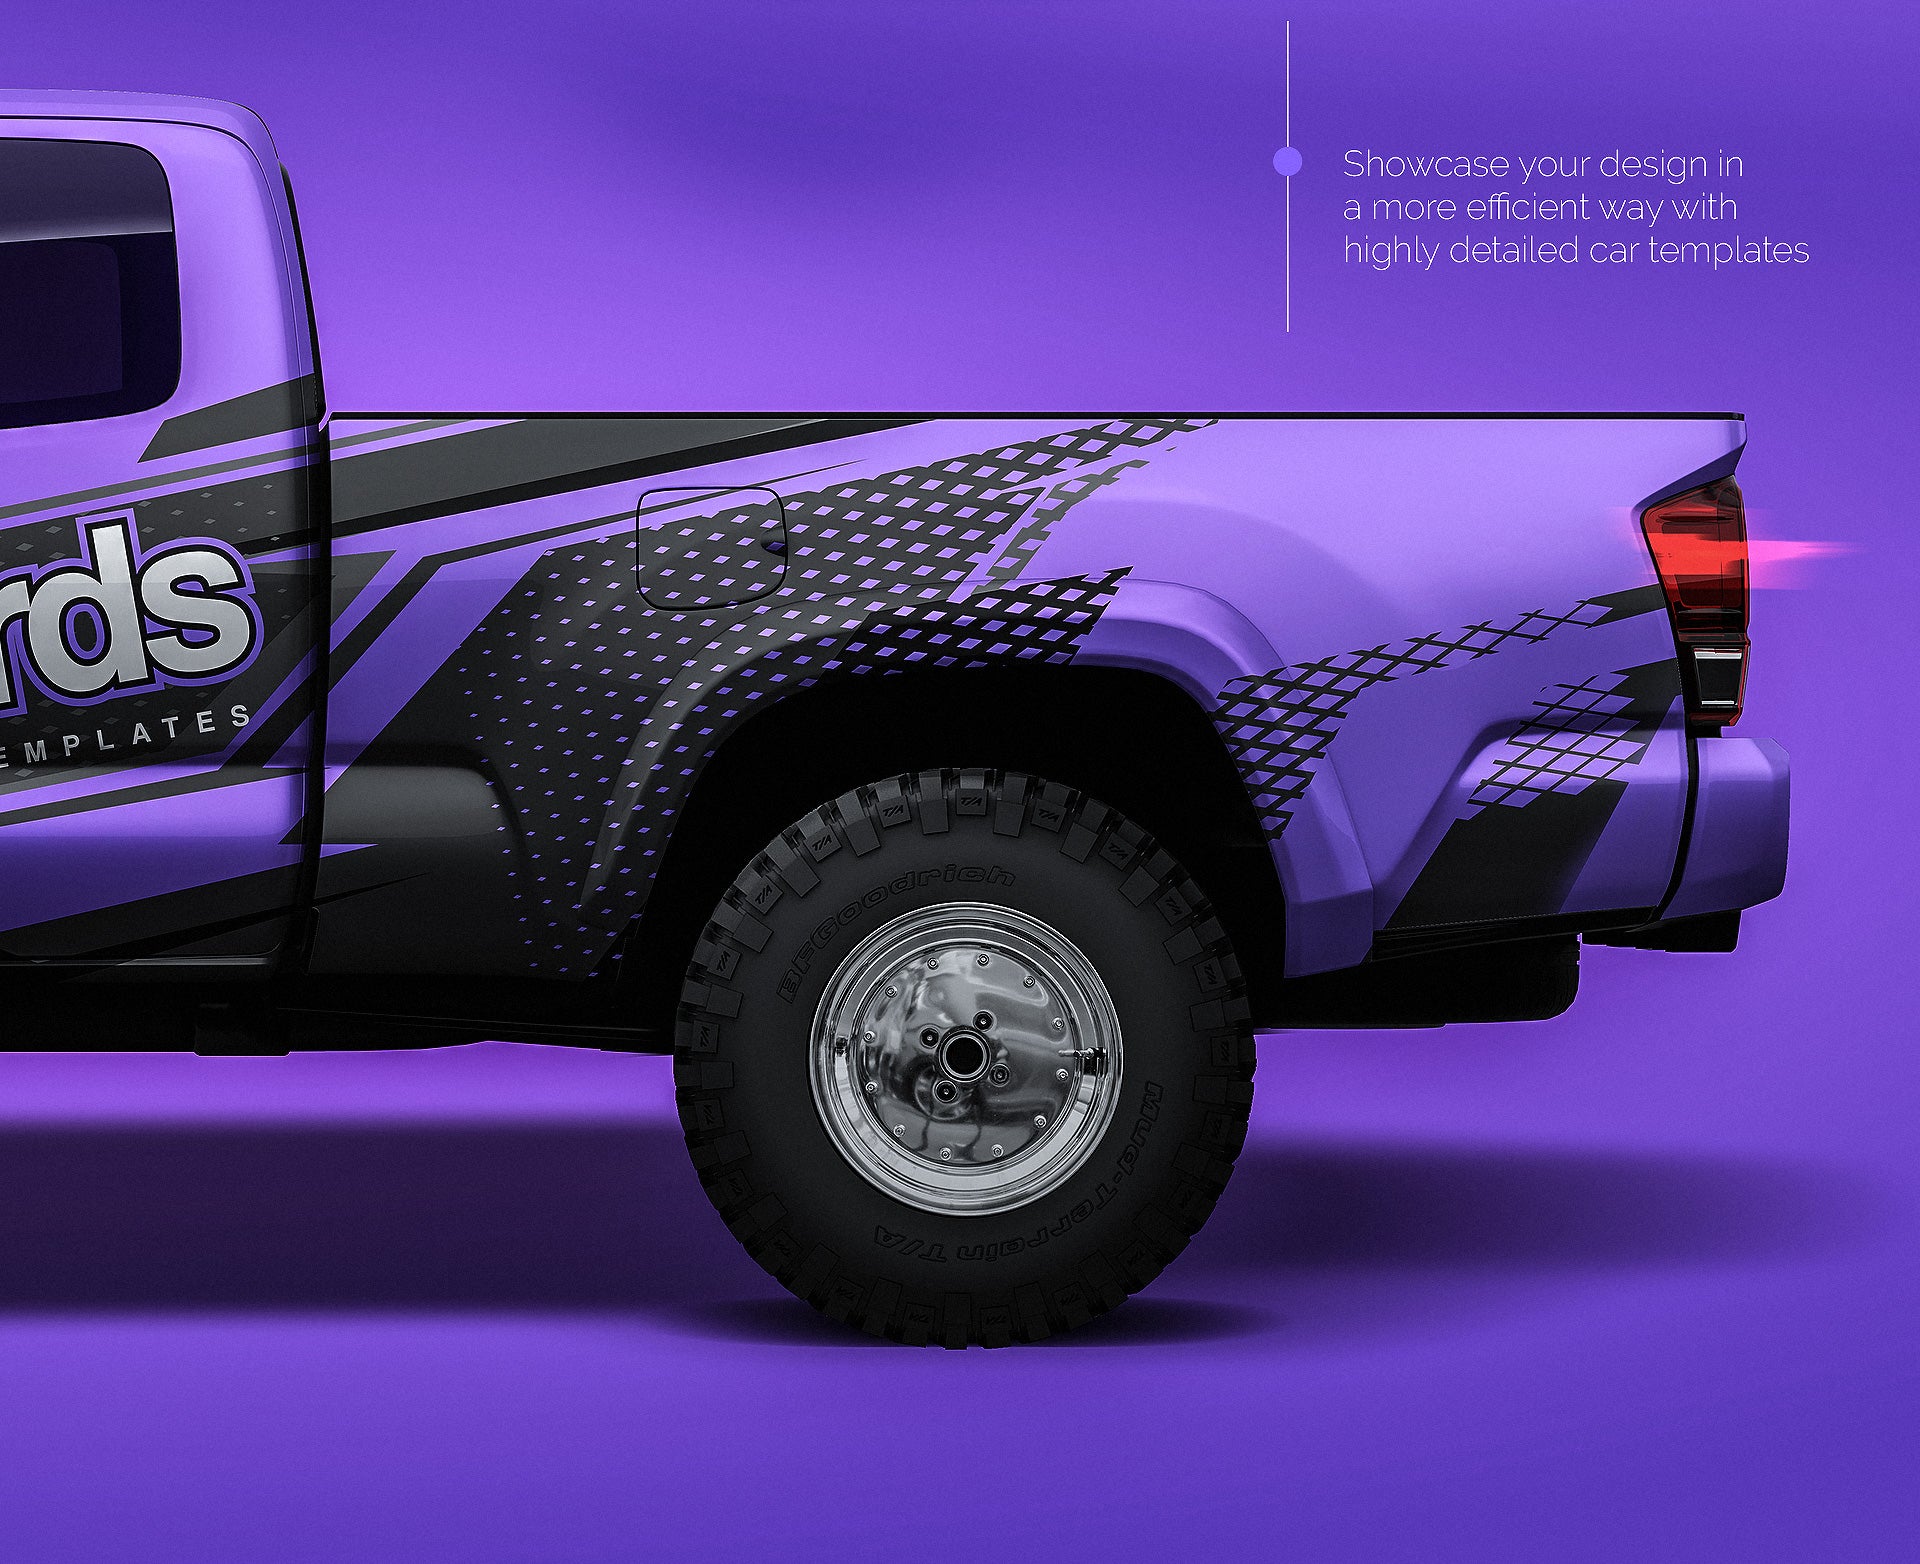 Toyota Tacoma TRD Off-Road 2016 glossy finish - all sides Car Mockup Template.psd